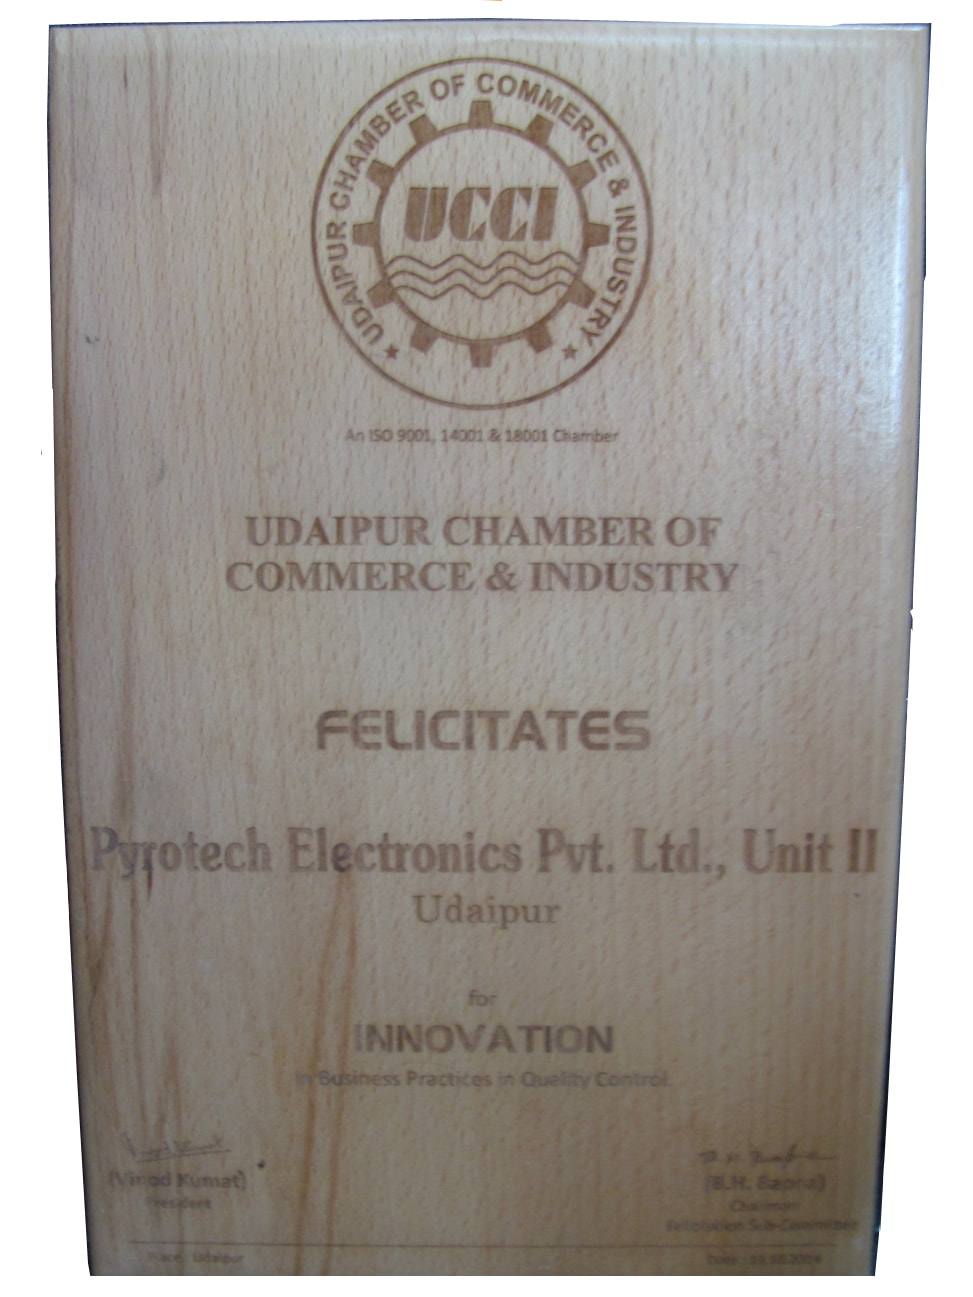 Udaipur Chamber of commerce & Industry